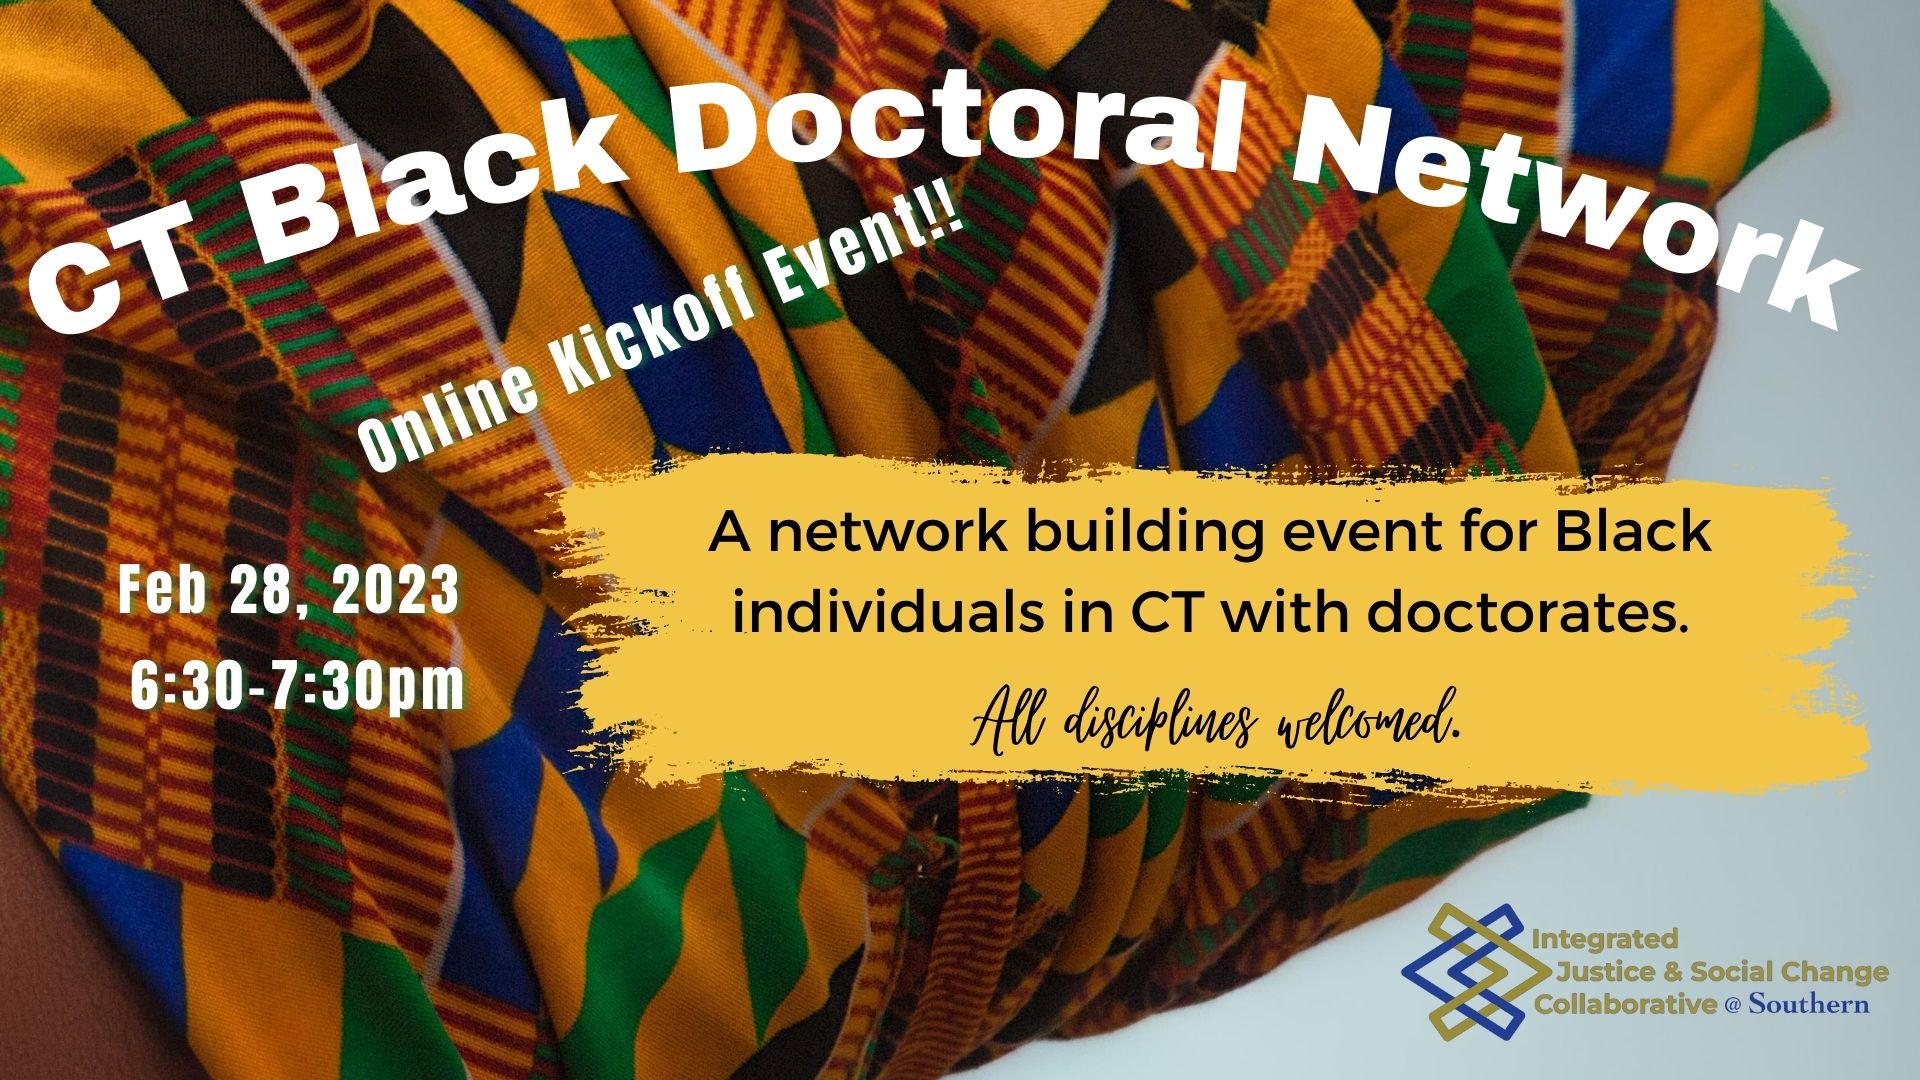 Kente cloth with the words CT Black Doctoral Network Online Kickoff Event Feb 28, 6:30-7:30pm